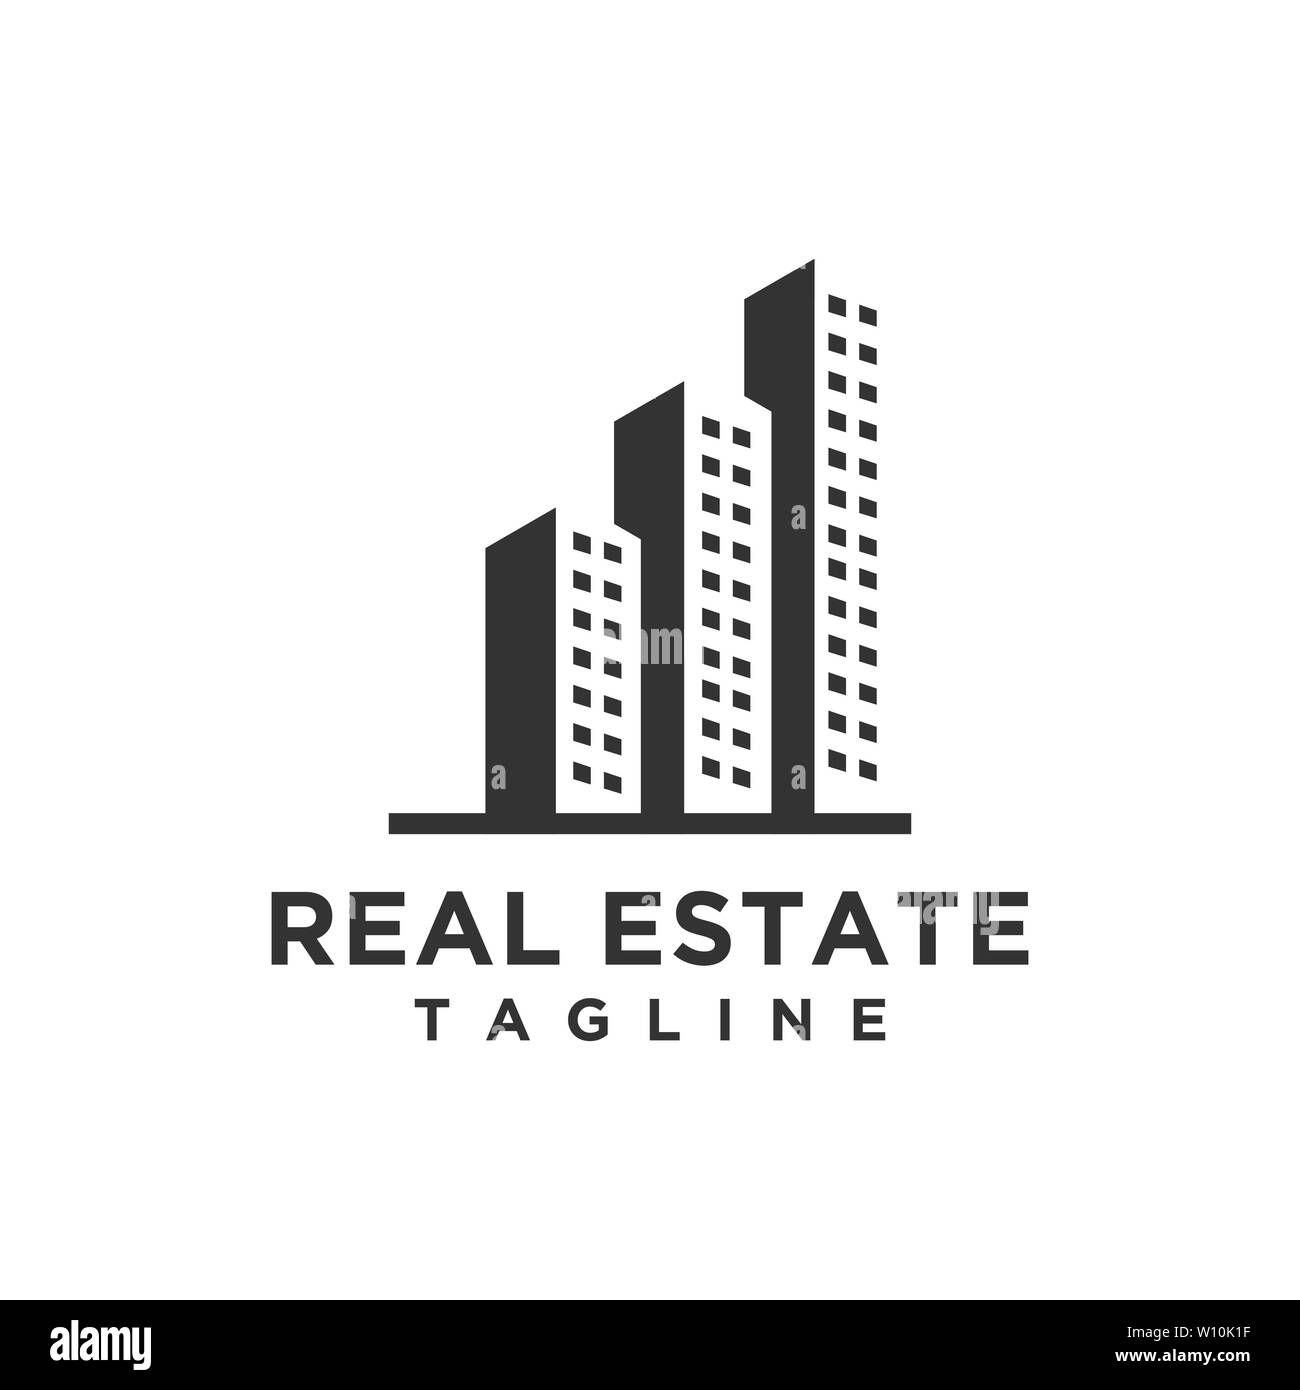 Luxury real estate logo design vector or building, hotel, home symbol for property business needs Stock Photo